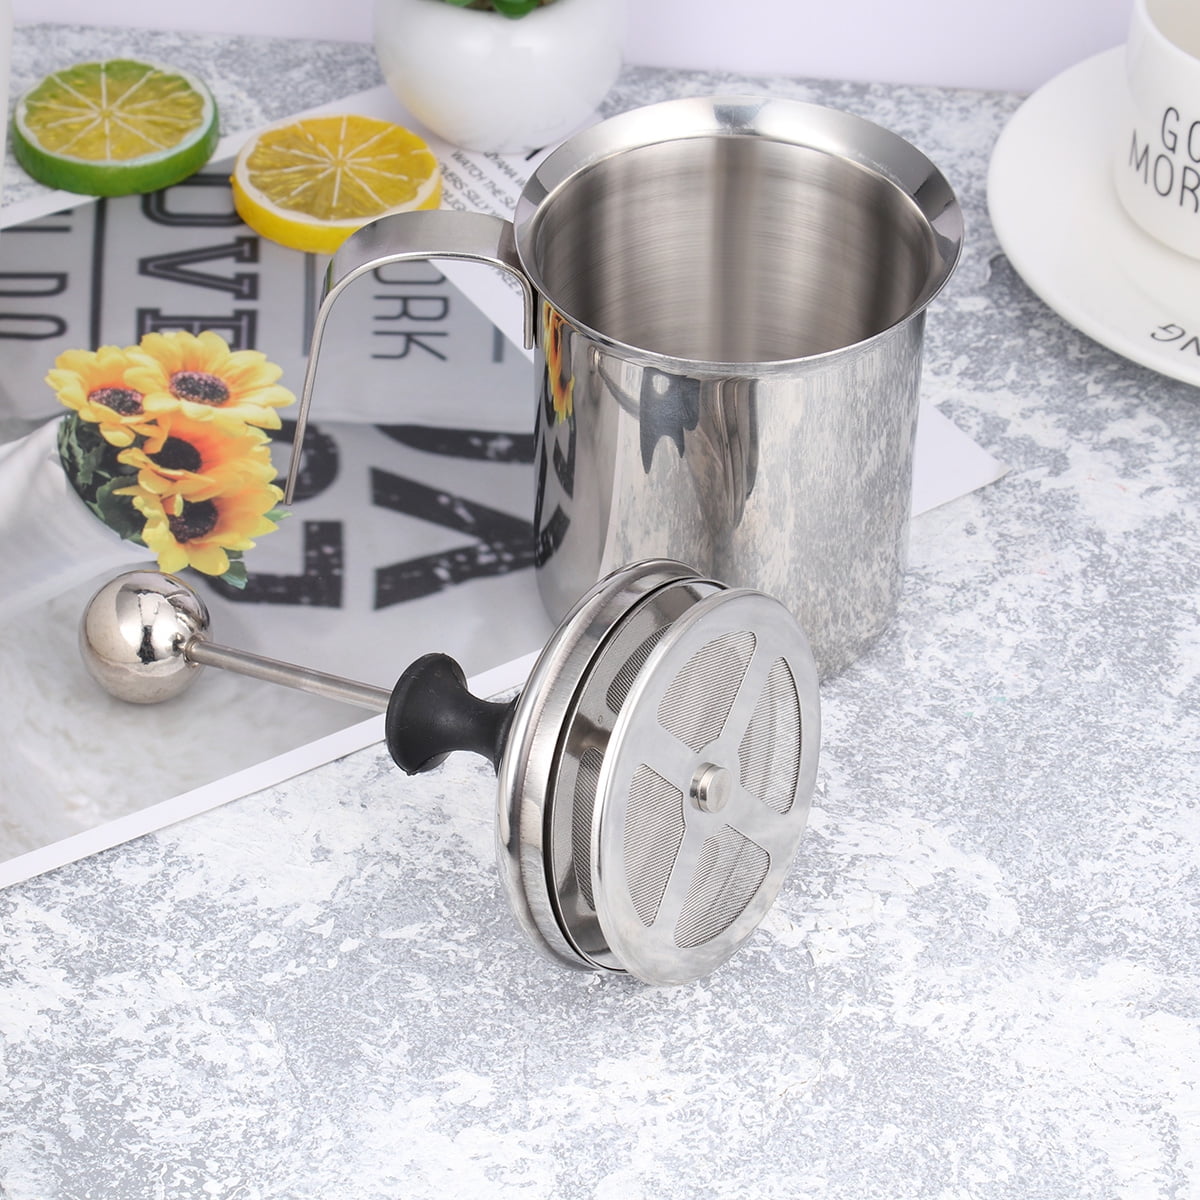 Manual Milk Frother, 400ml/14oz Stainless Steel Creamer Frother Milk  Steamer Latte Cappuccino Coffee Foamer Frother Handled Metal Milk Creamer  Milk